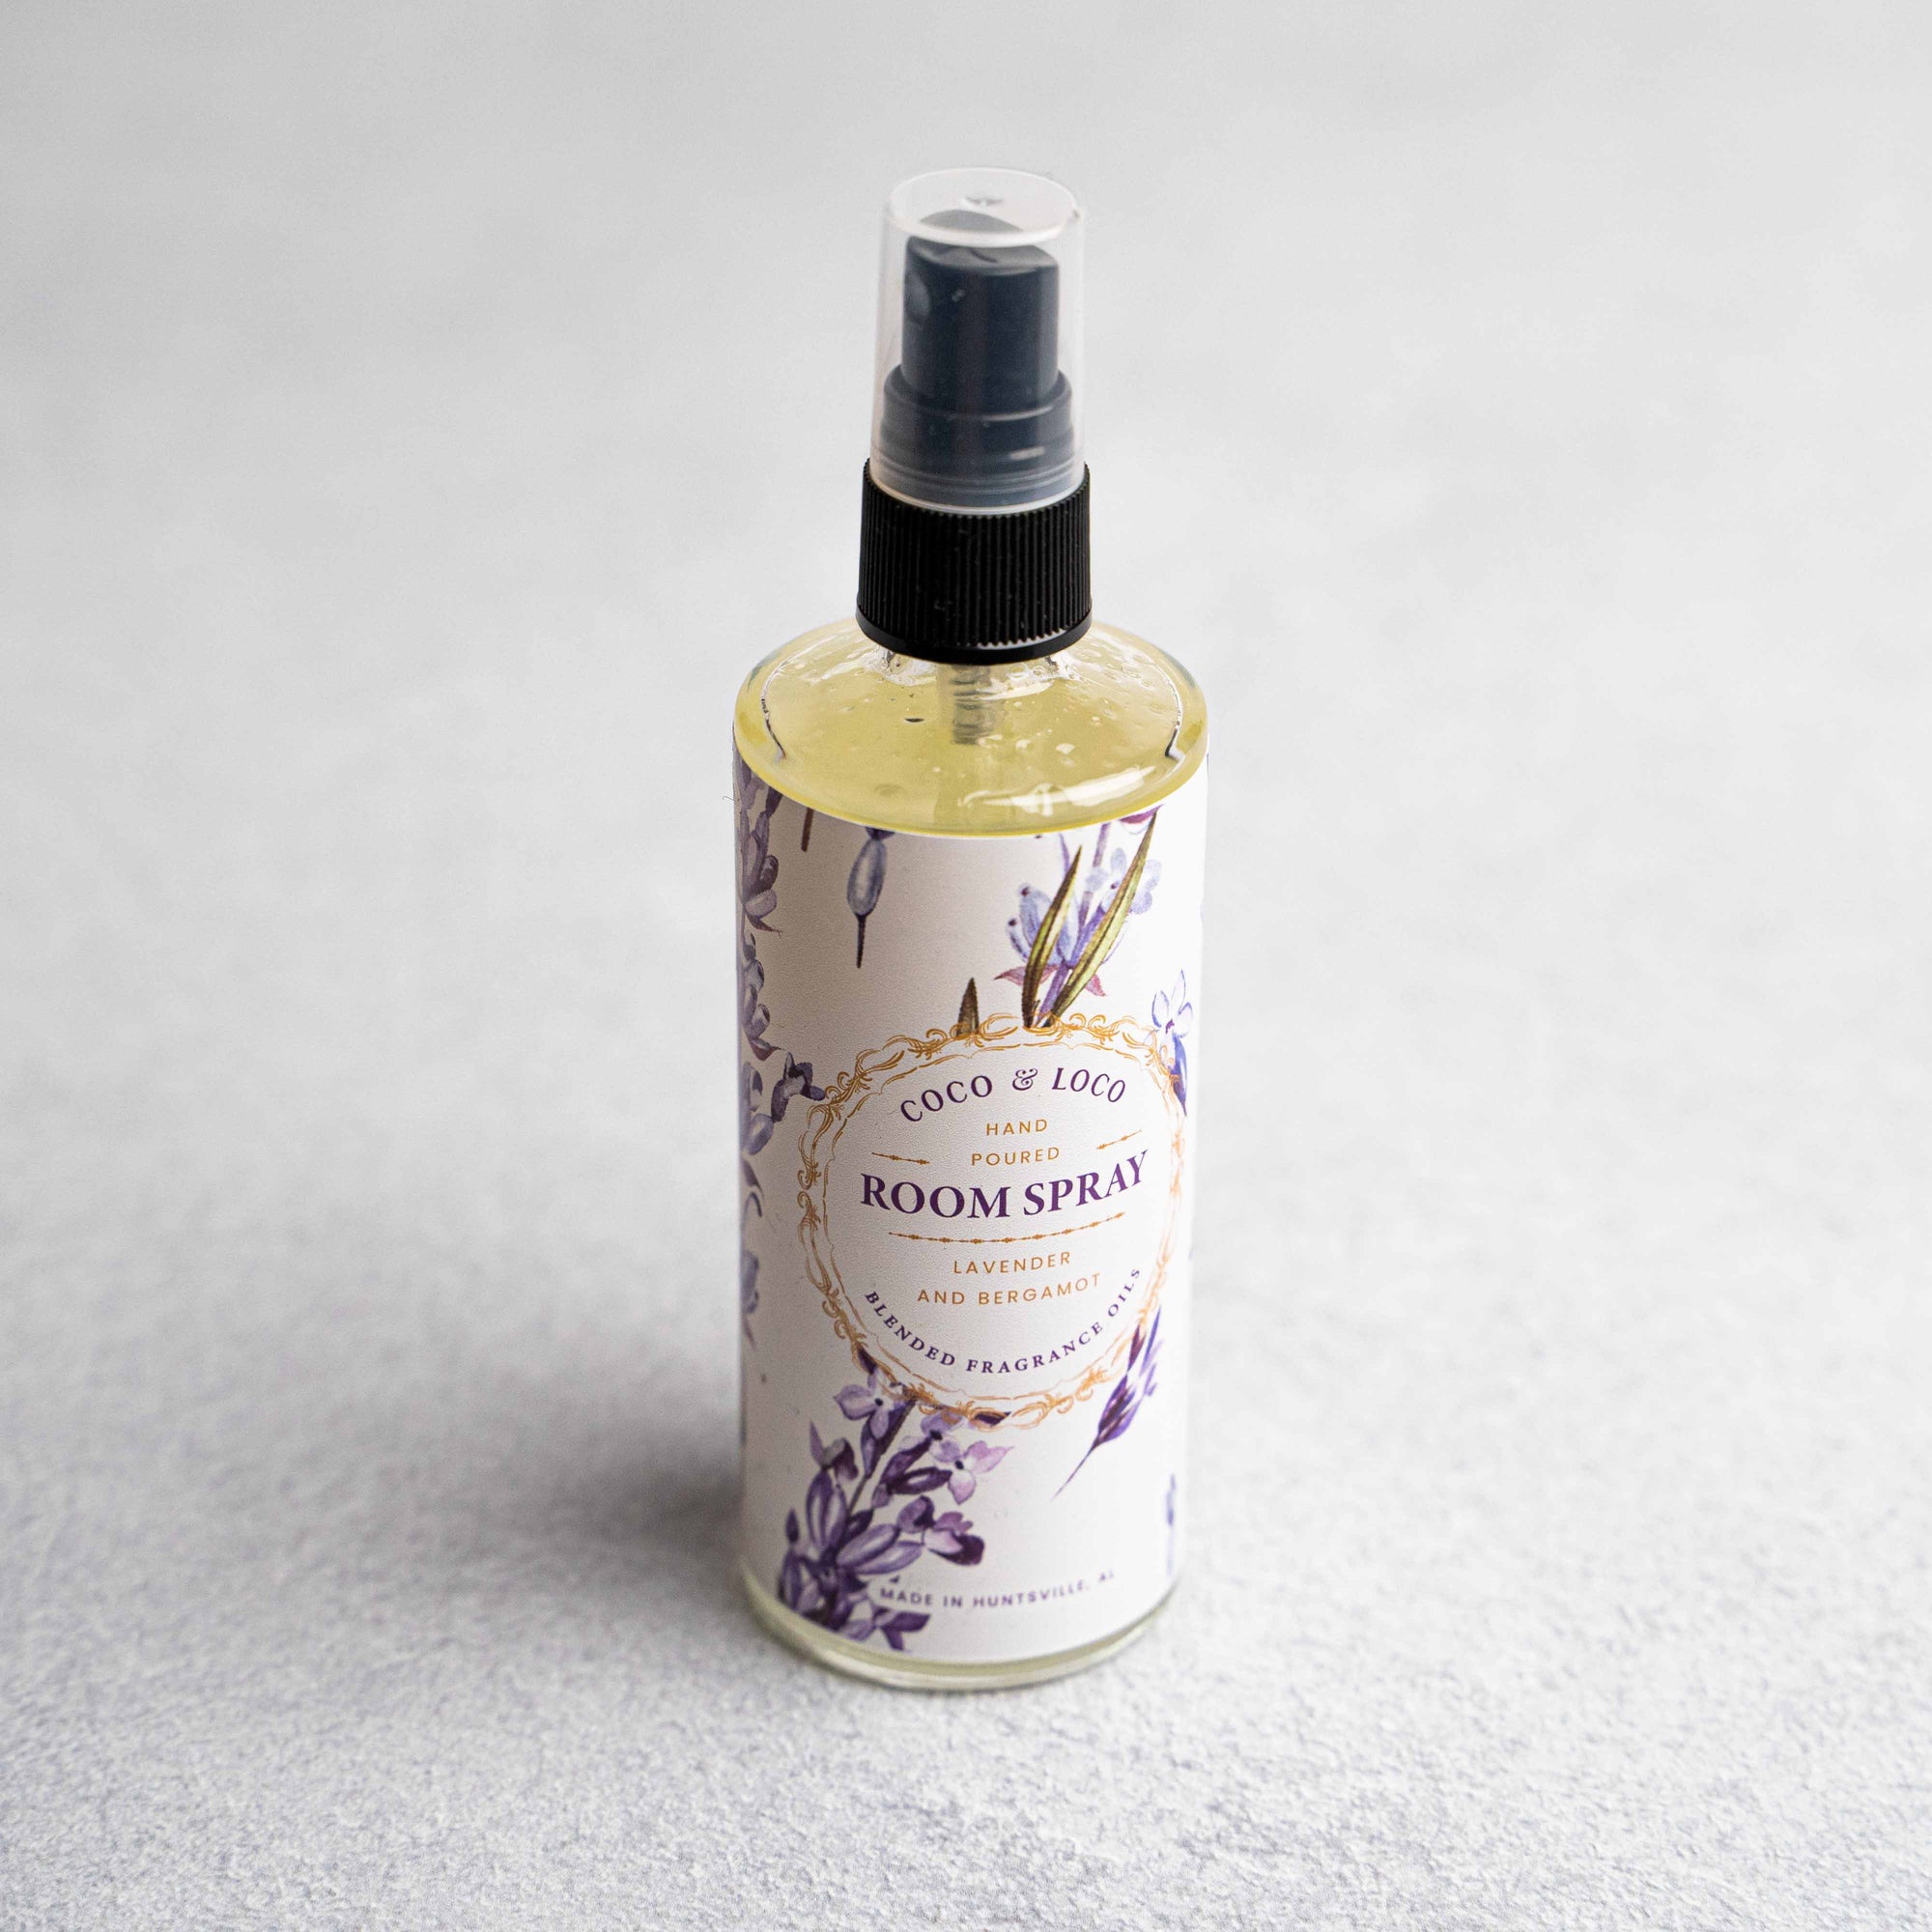 Lavender and Bergamot scented room spray by Coco & Loco at Holtz Leather Co